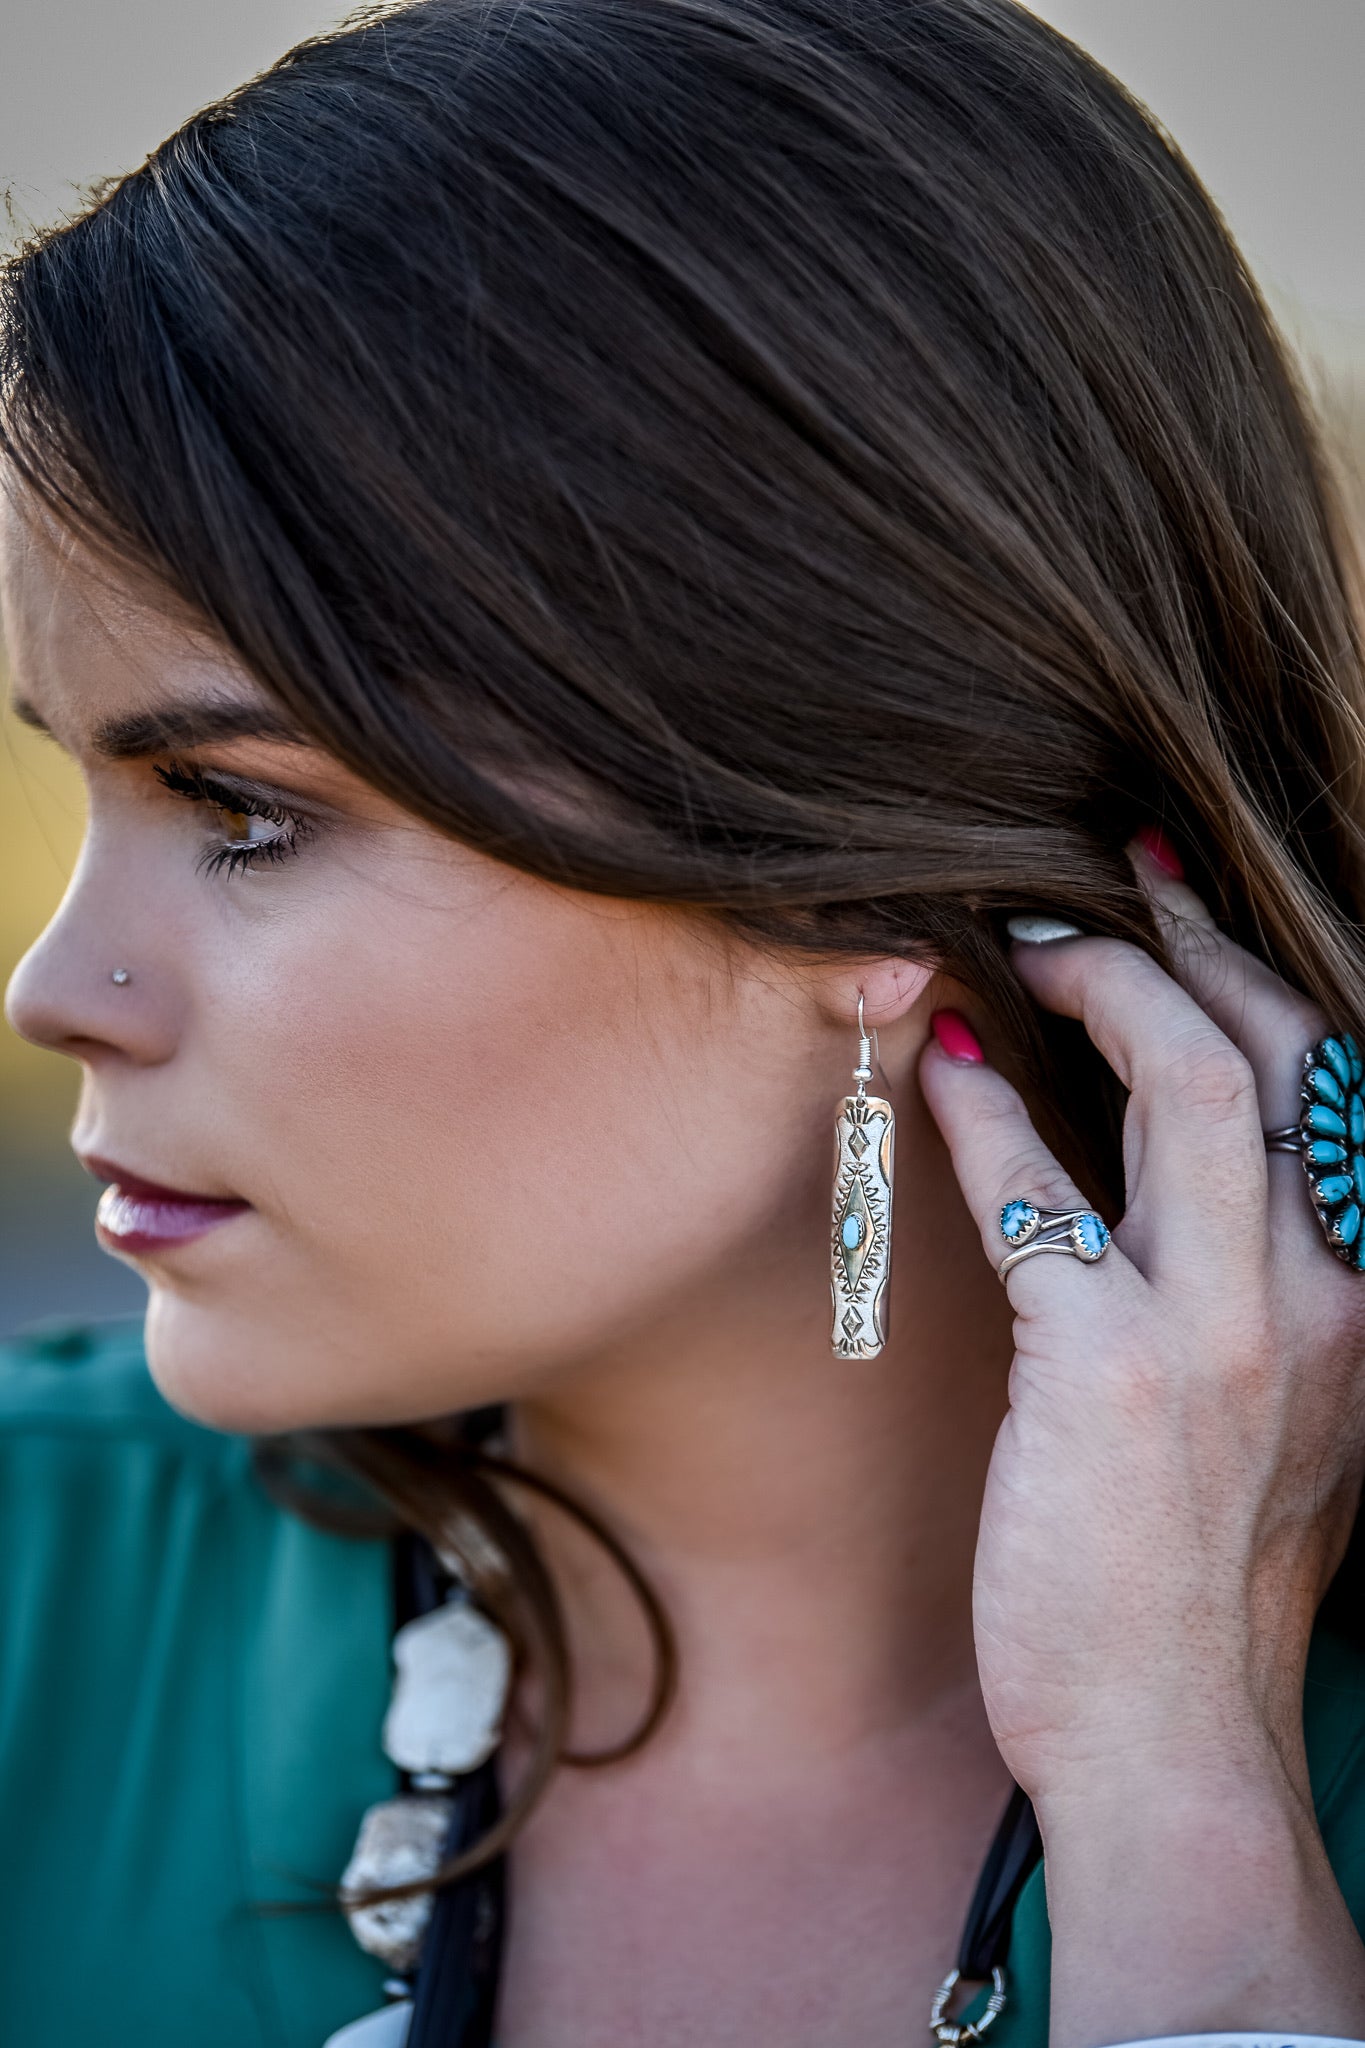 The Colorado Turquoise Earrings